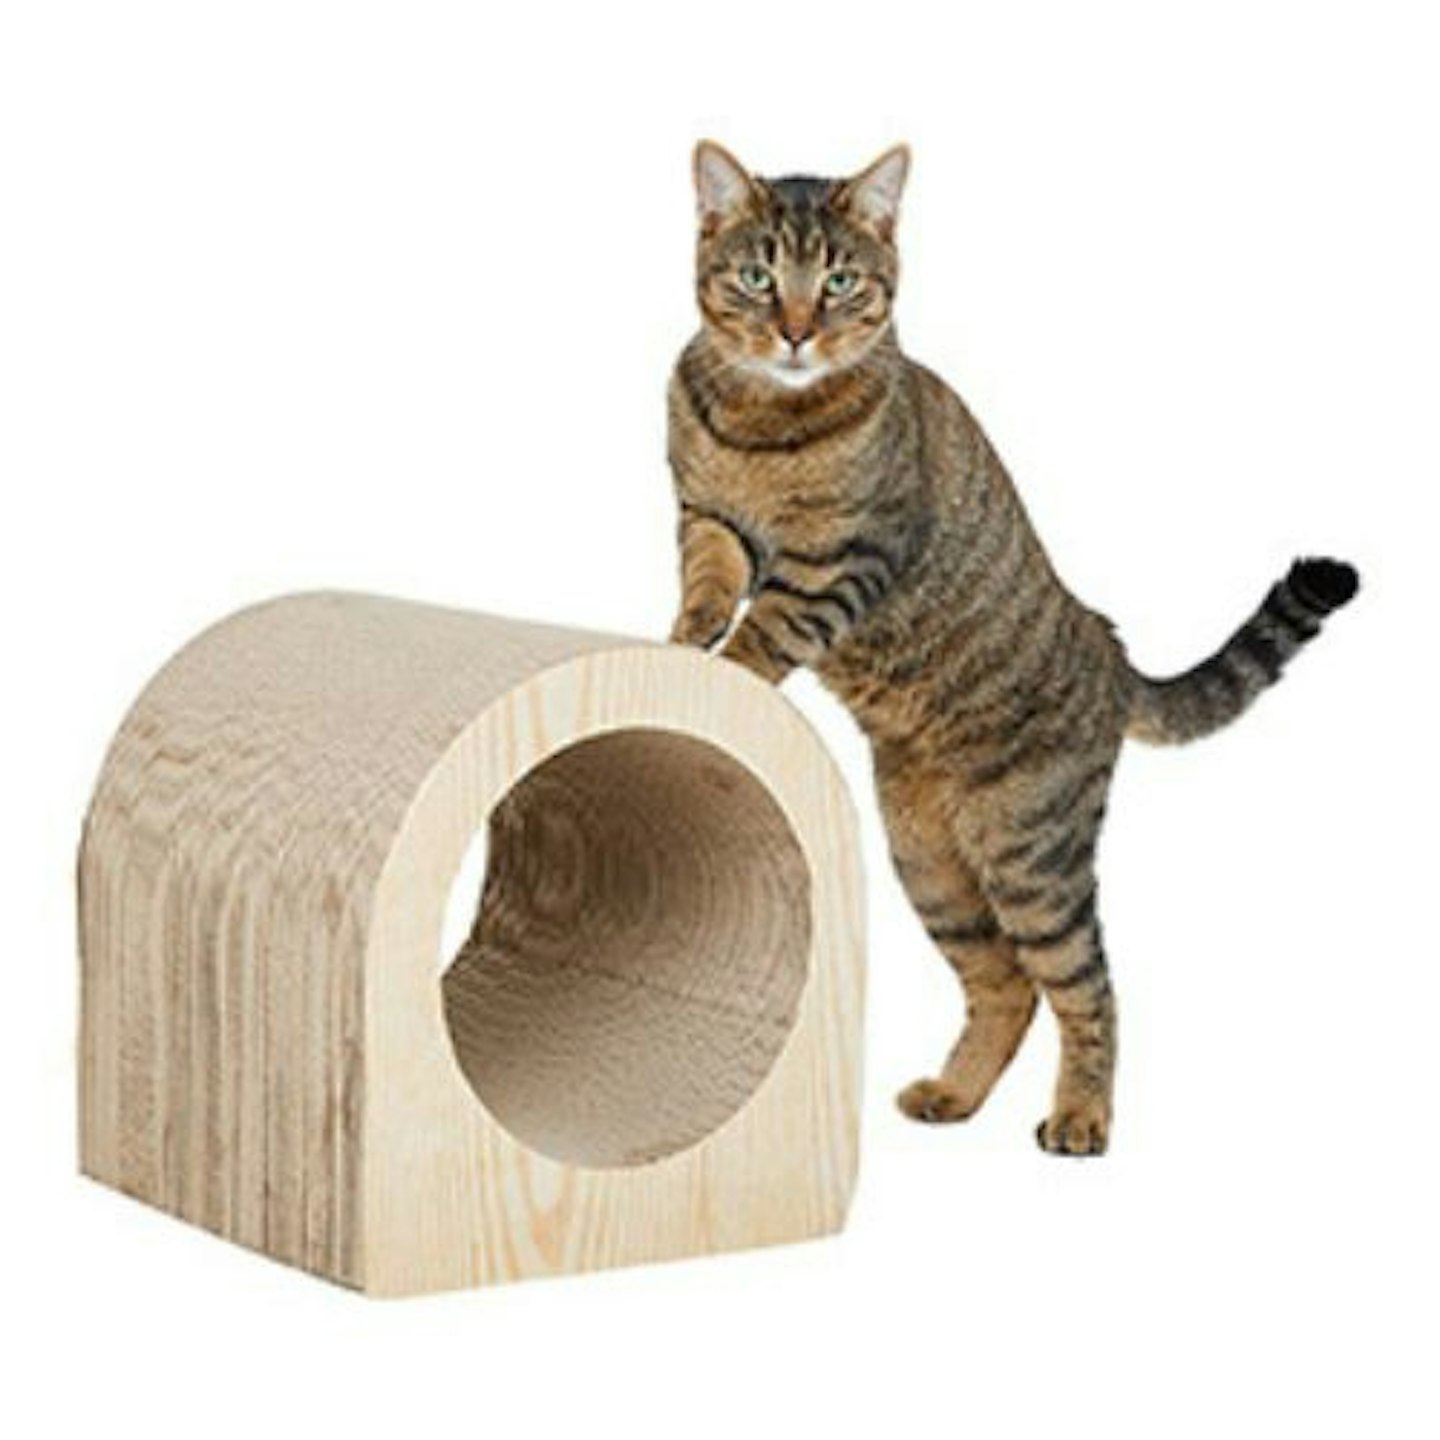 Willow's Scratch and Hide Cat Tunnel Toy